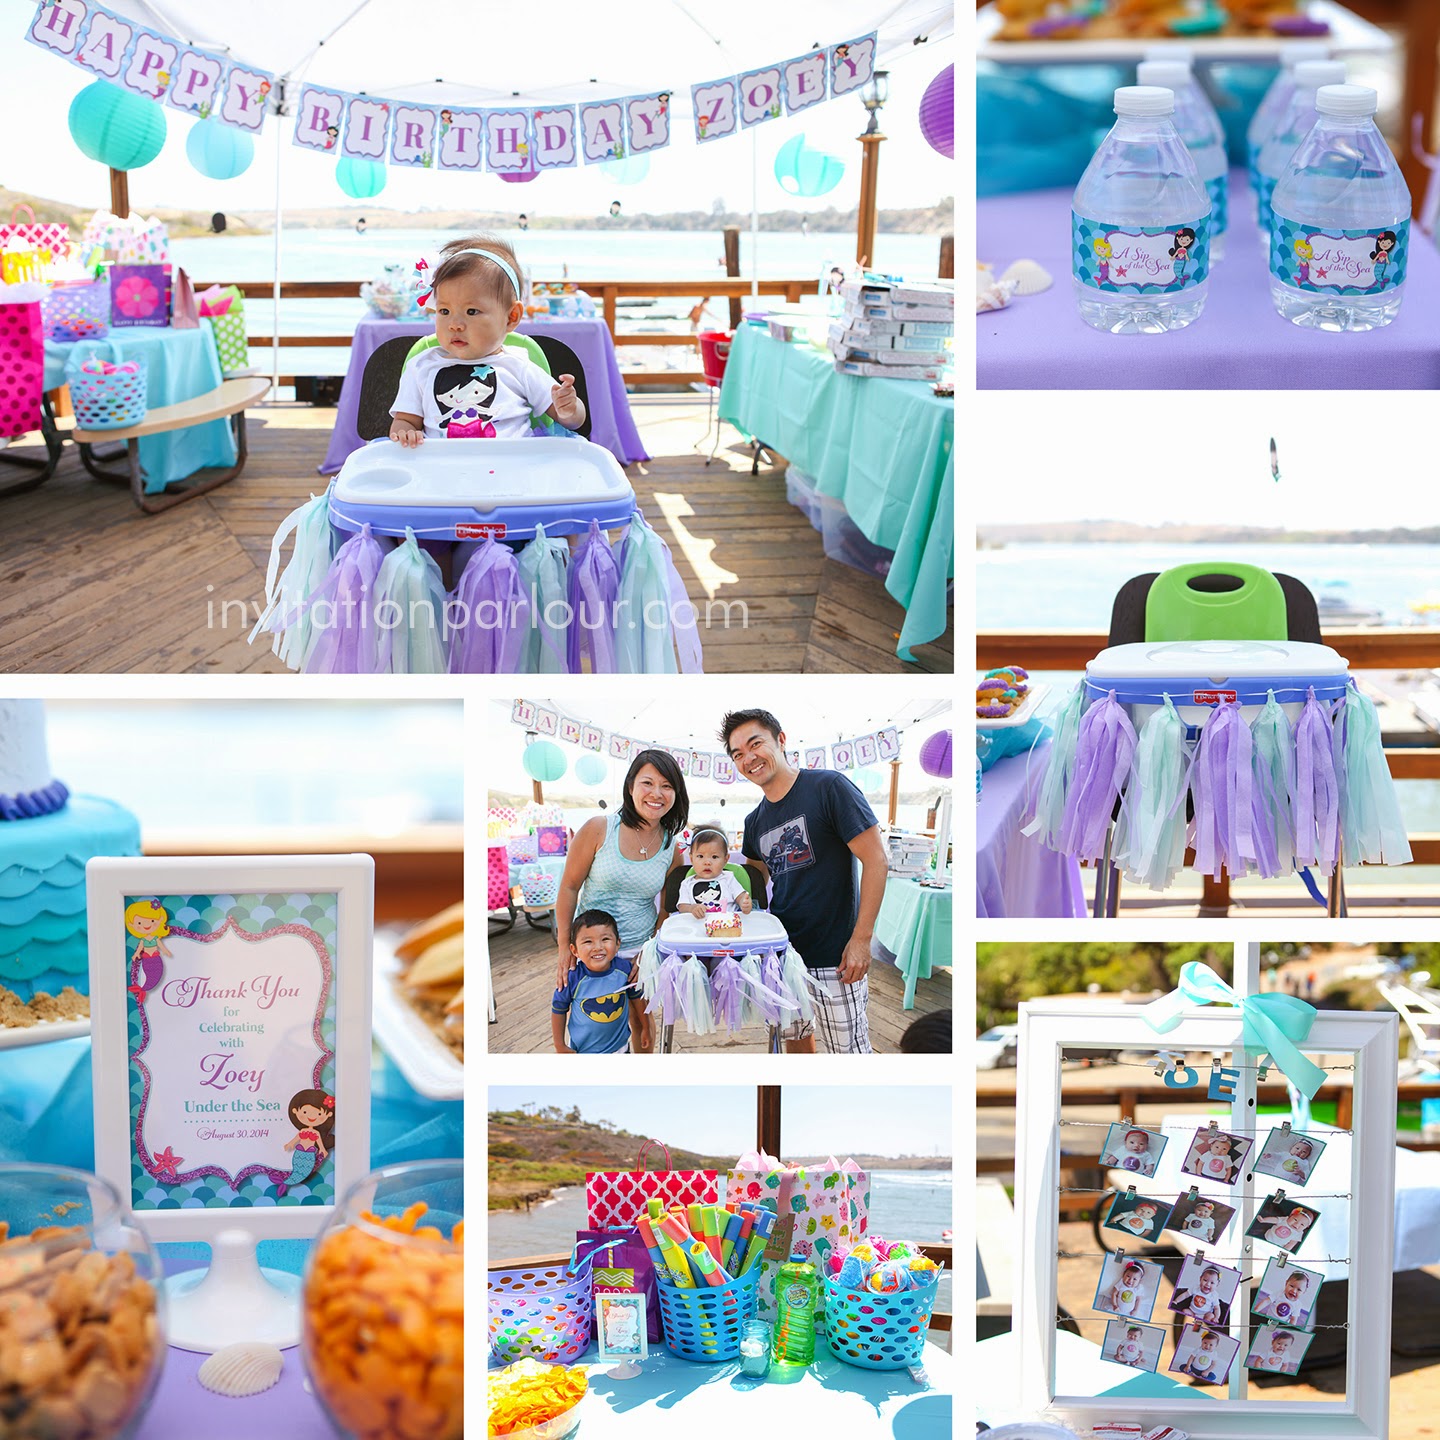 Invitation Parlour: Mermaid Under the Sea Birthday Party at the ...